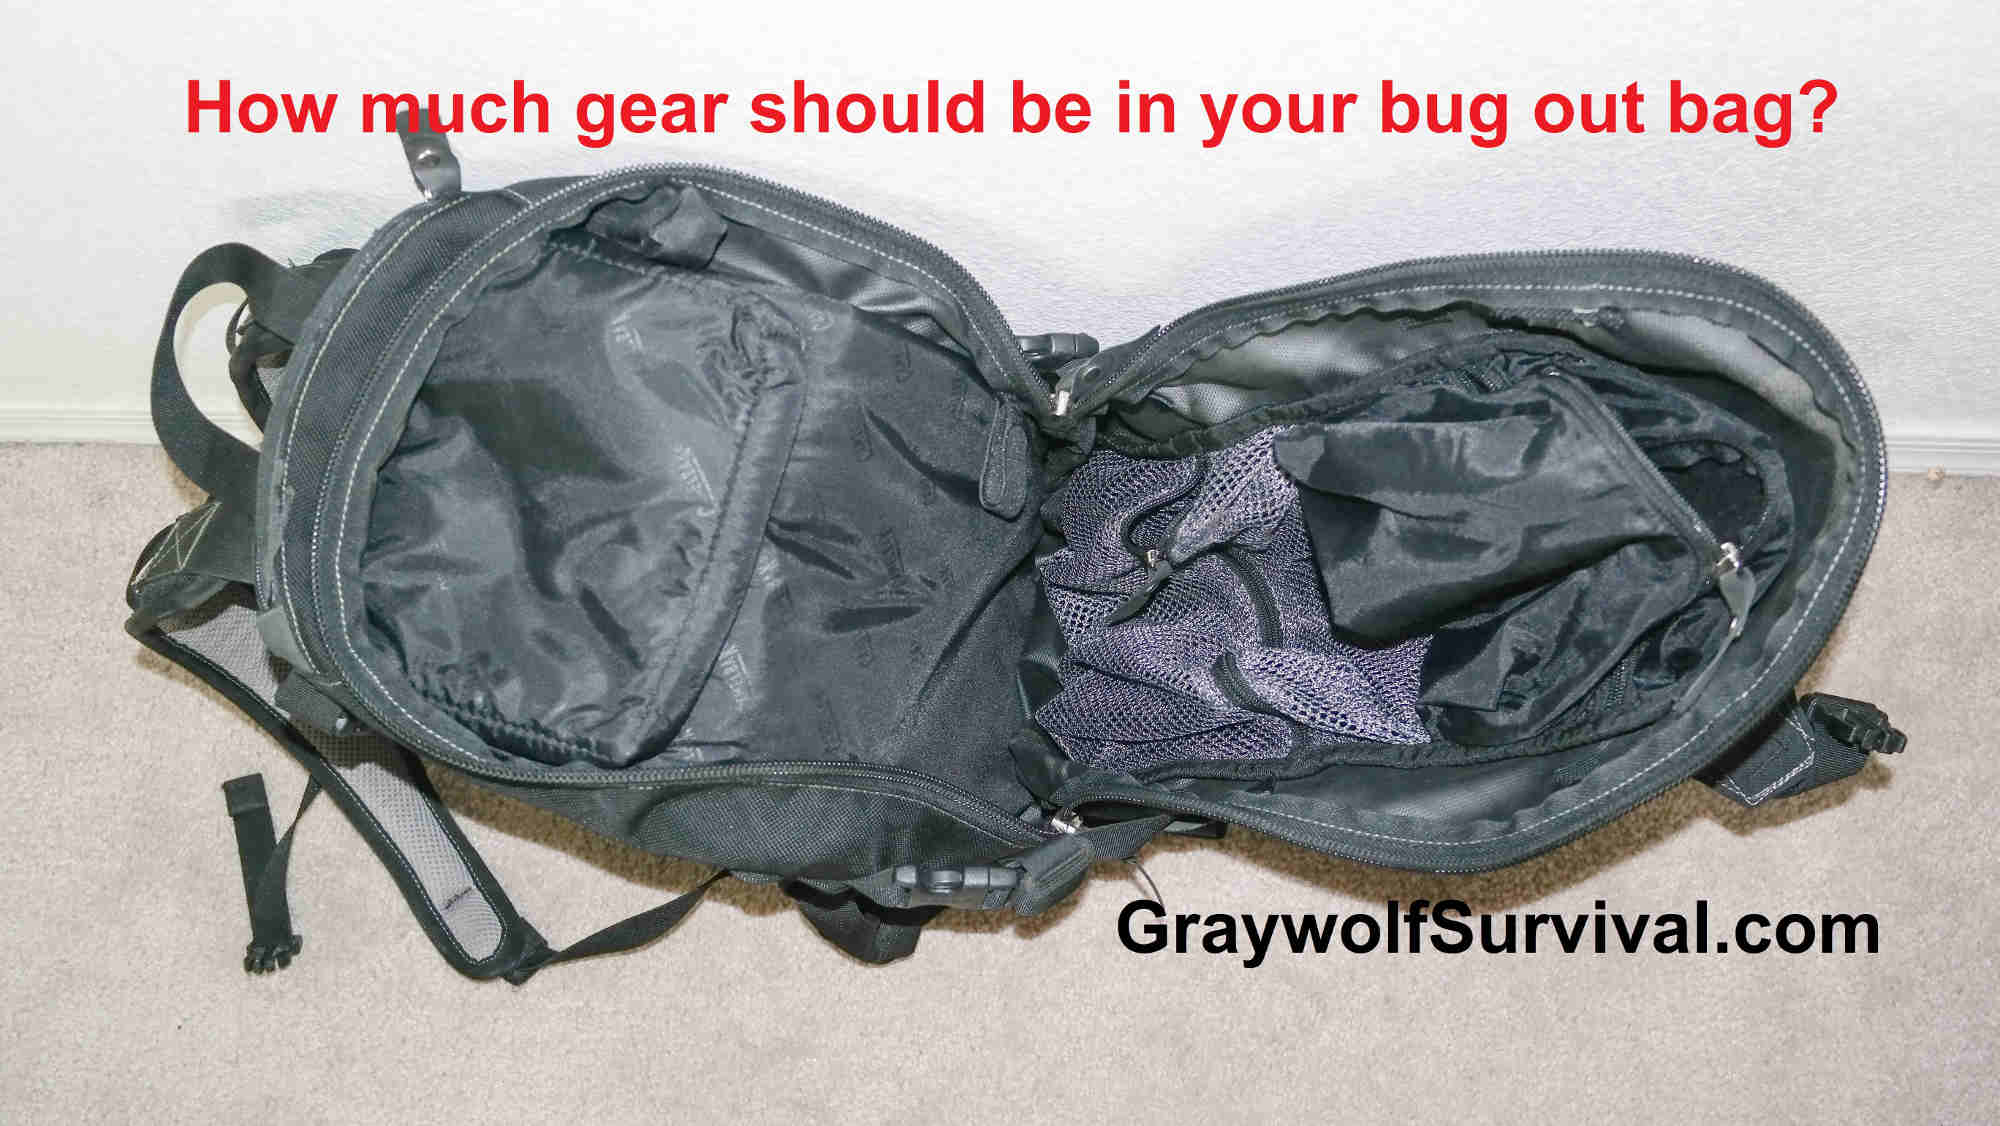 Ready To Go With NEW Supplies EDC (Every Day Carry) Bag, Bug Out Bag, When  SHTF!